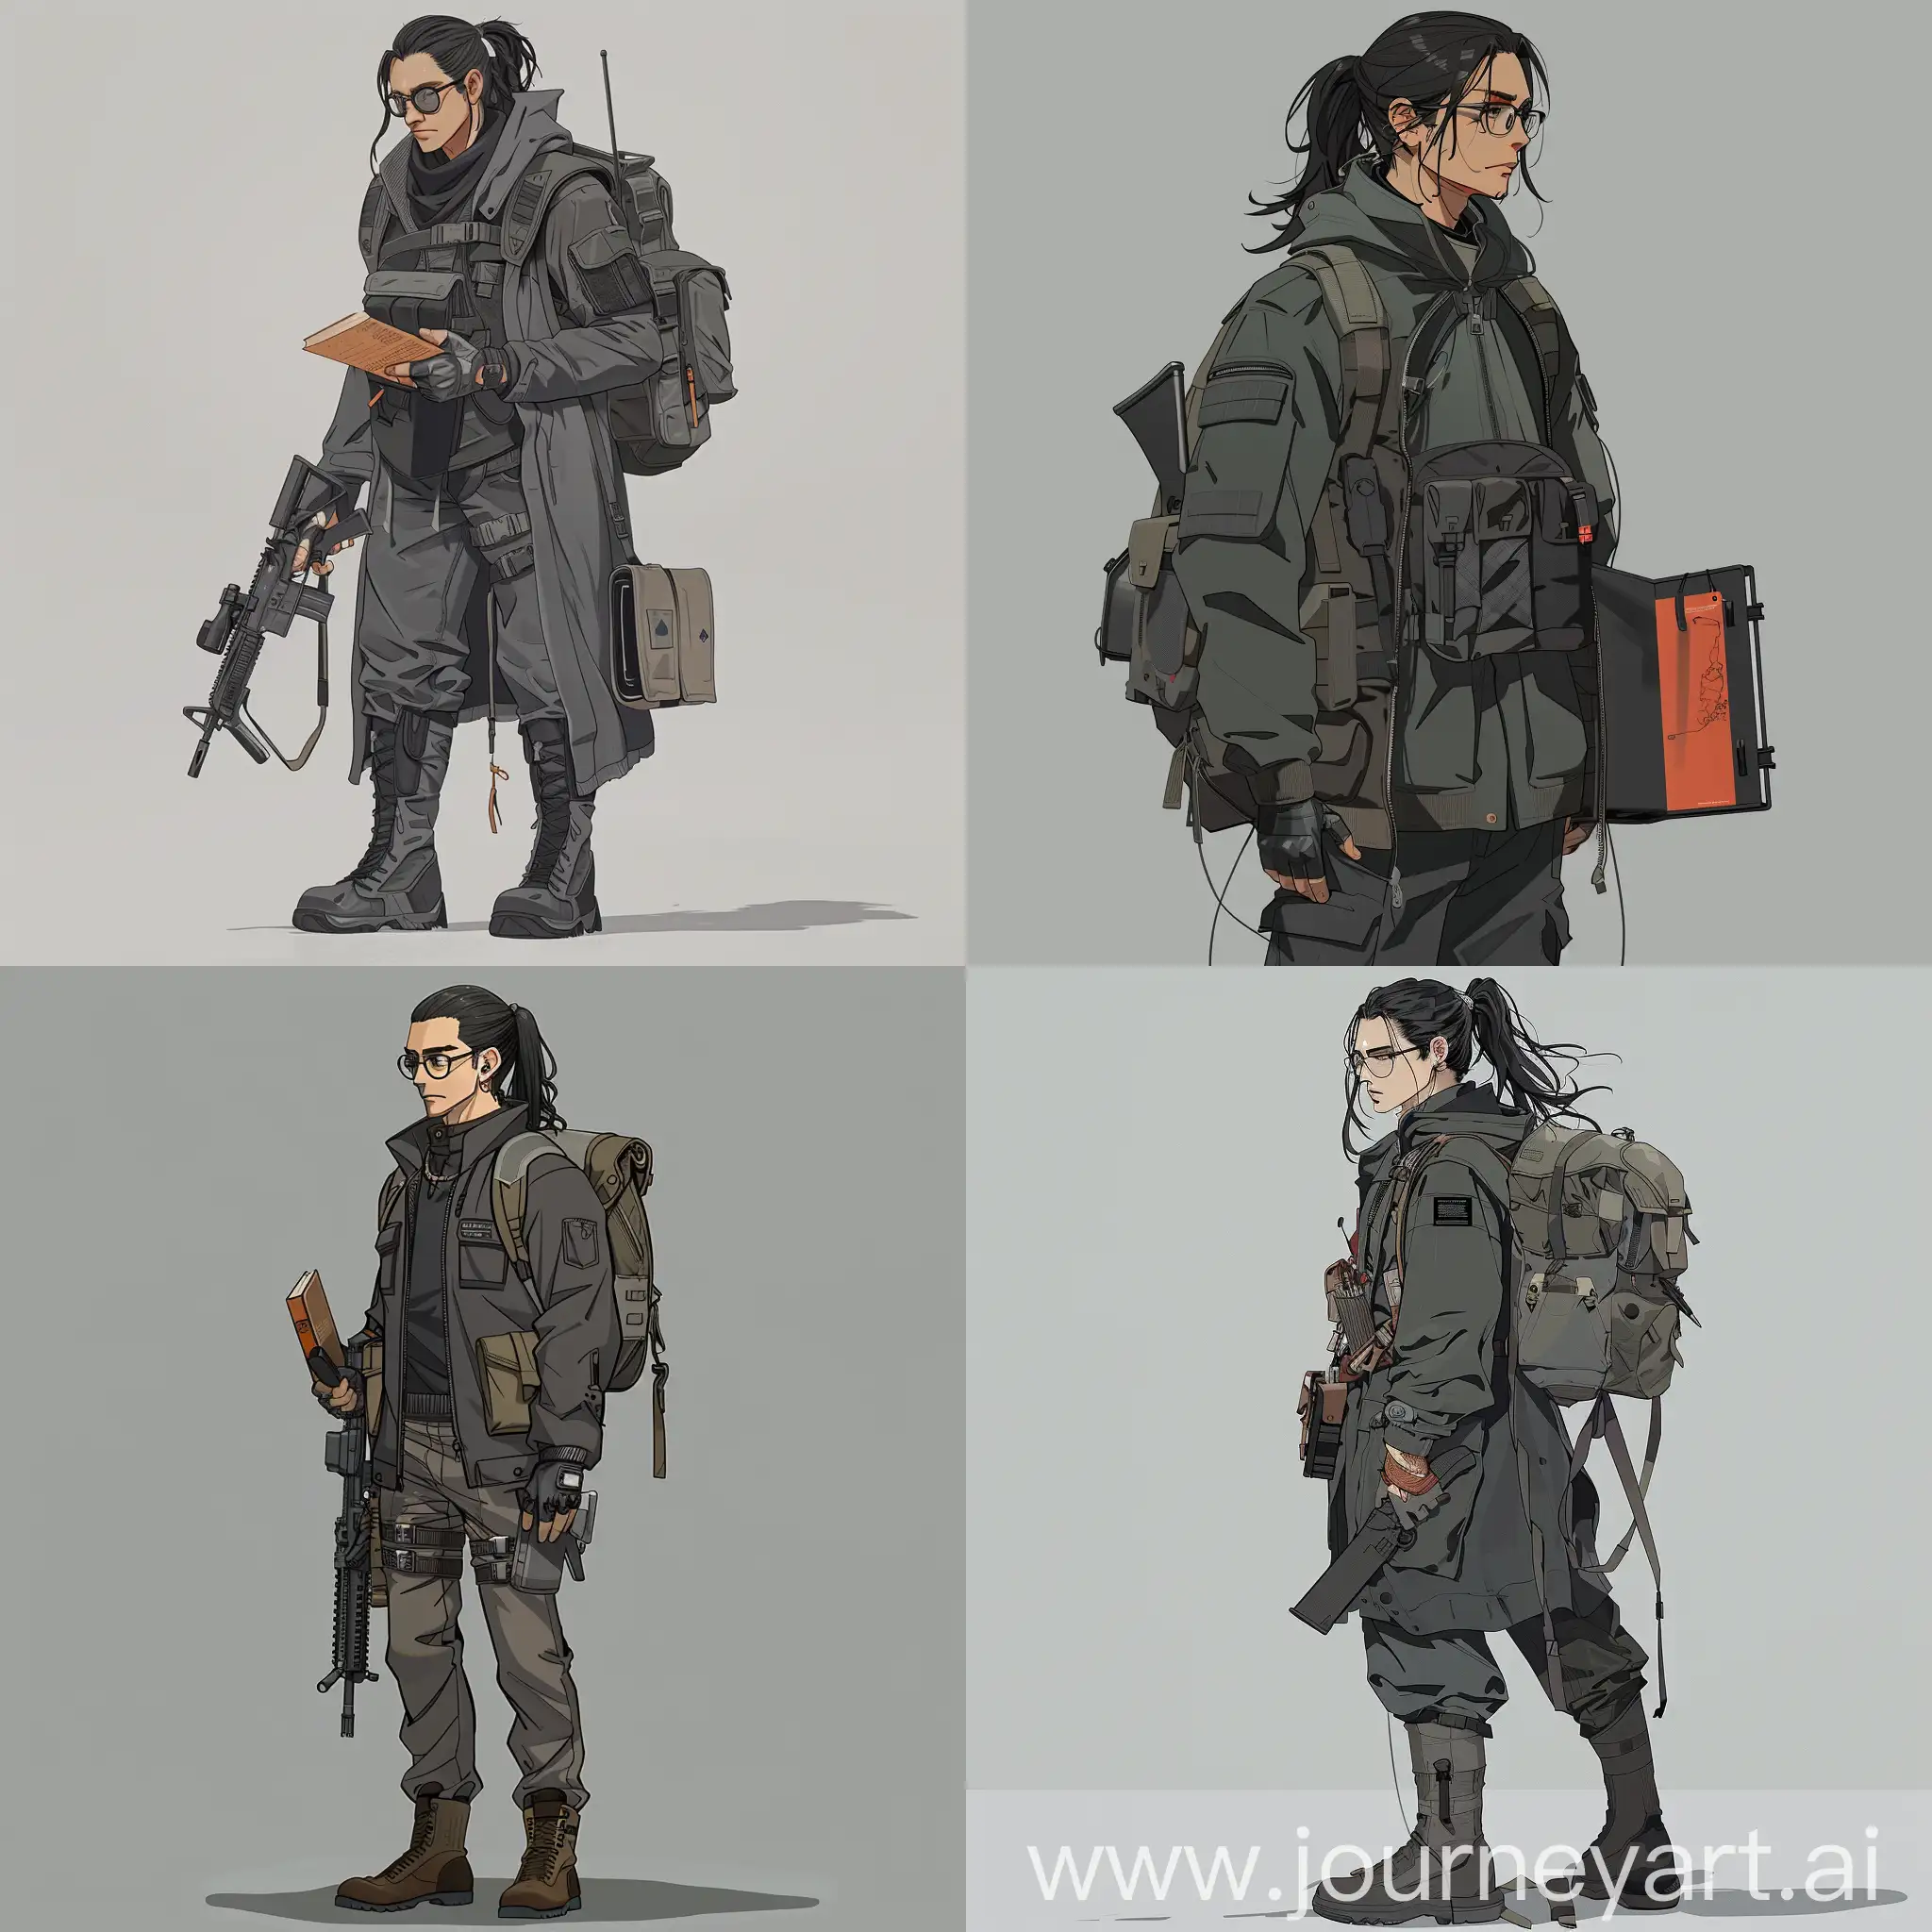 The man, 25 years old, is 154 cm tall, long black hair pulled back into a ponytail, a dark gray windbreaker with four pockets, a book is 14 cm high and 7 cm long sticking out of one. dark gray trousers, military boots. Wear glasses. On the belt there are two holsters with pistols, one dark gray, the other light gray. There is also a case with a dagger.